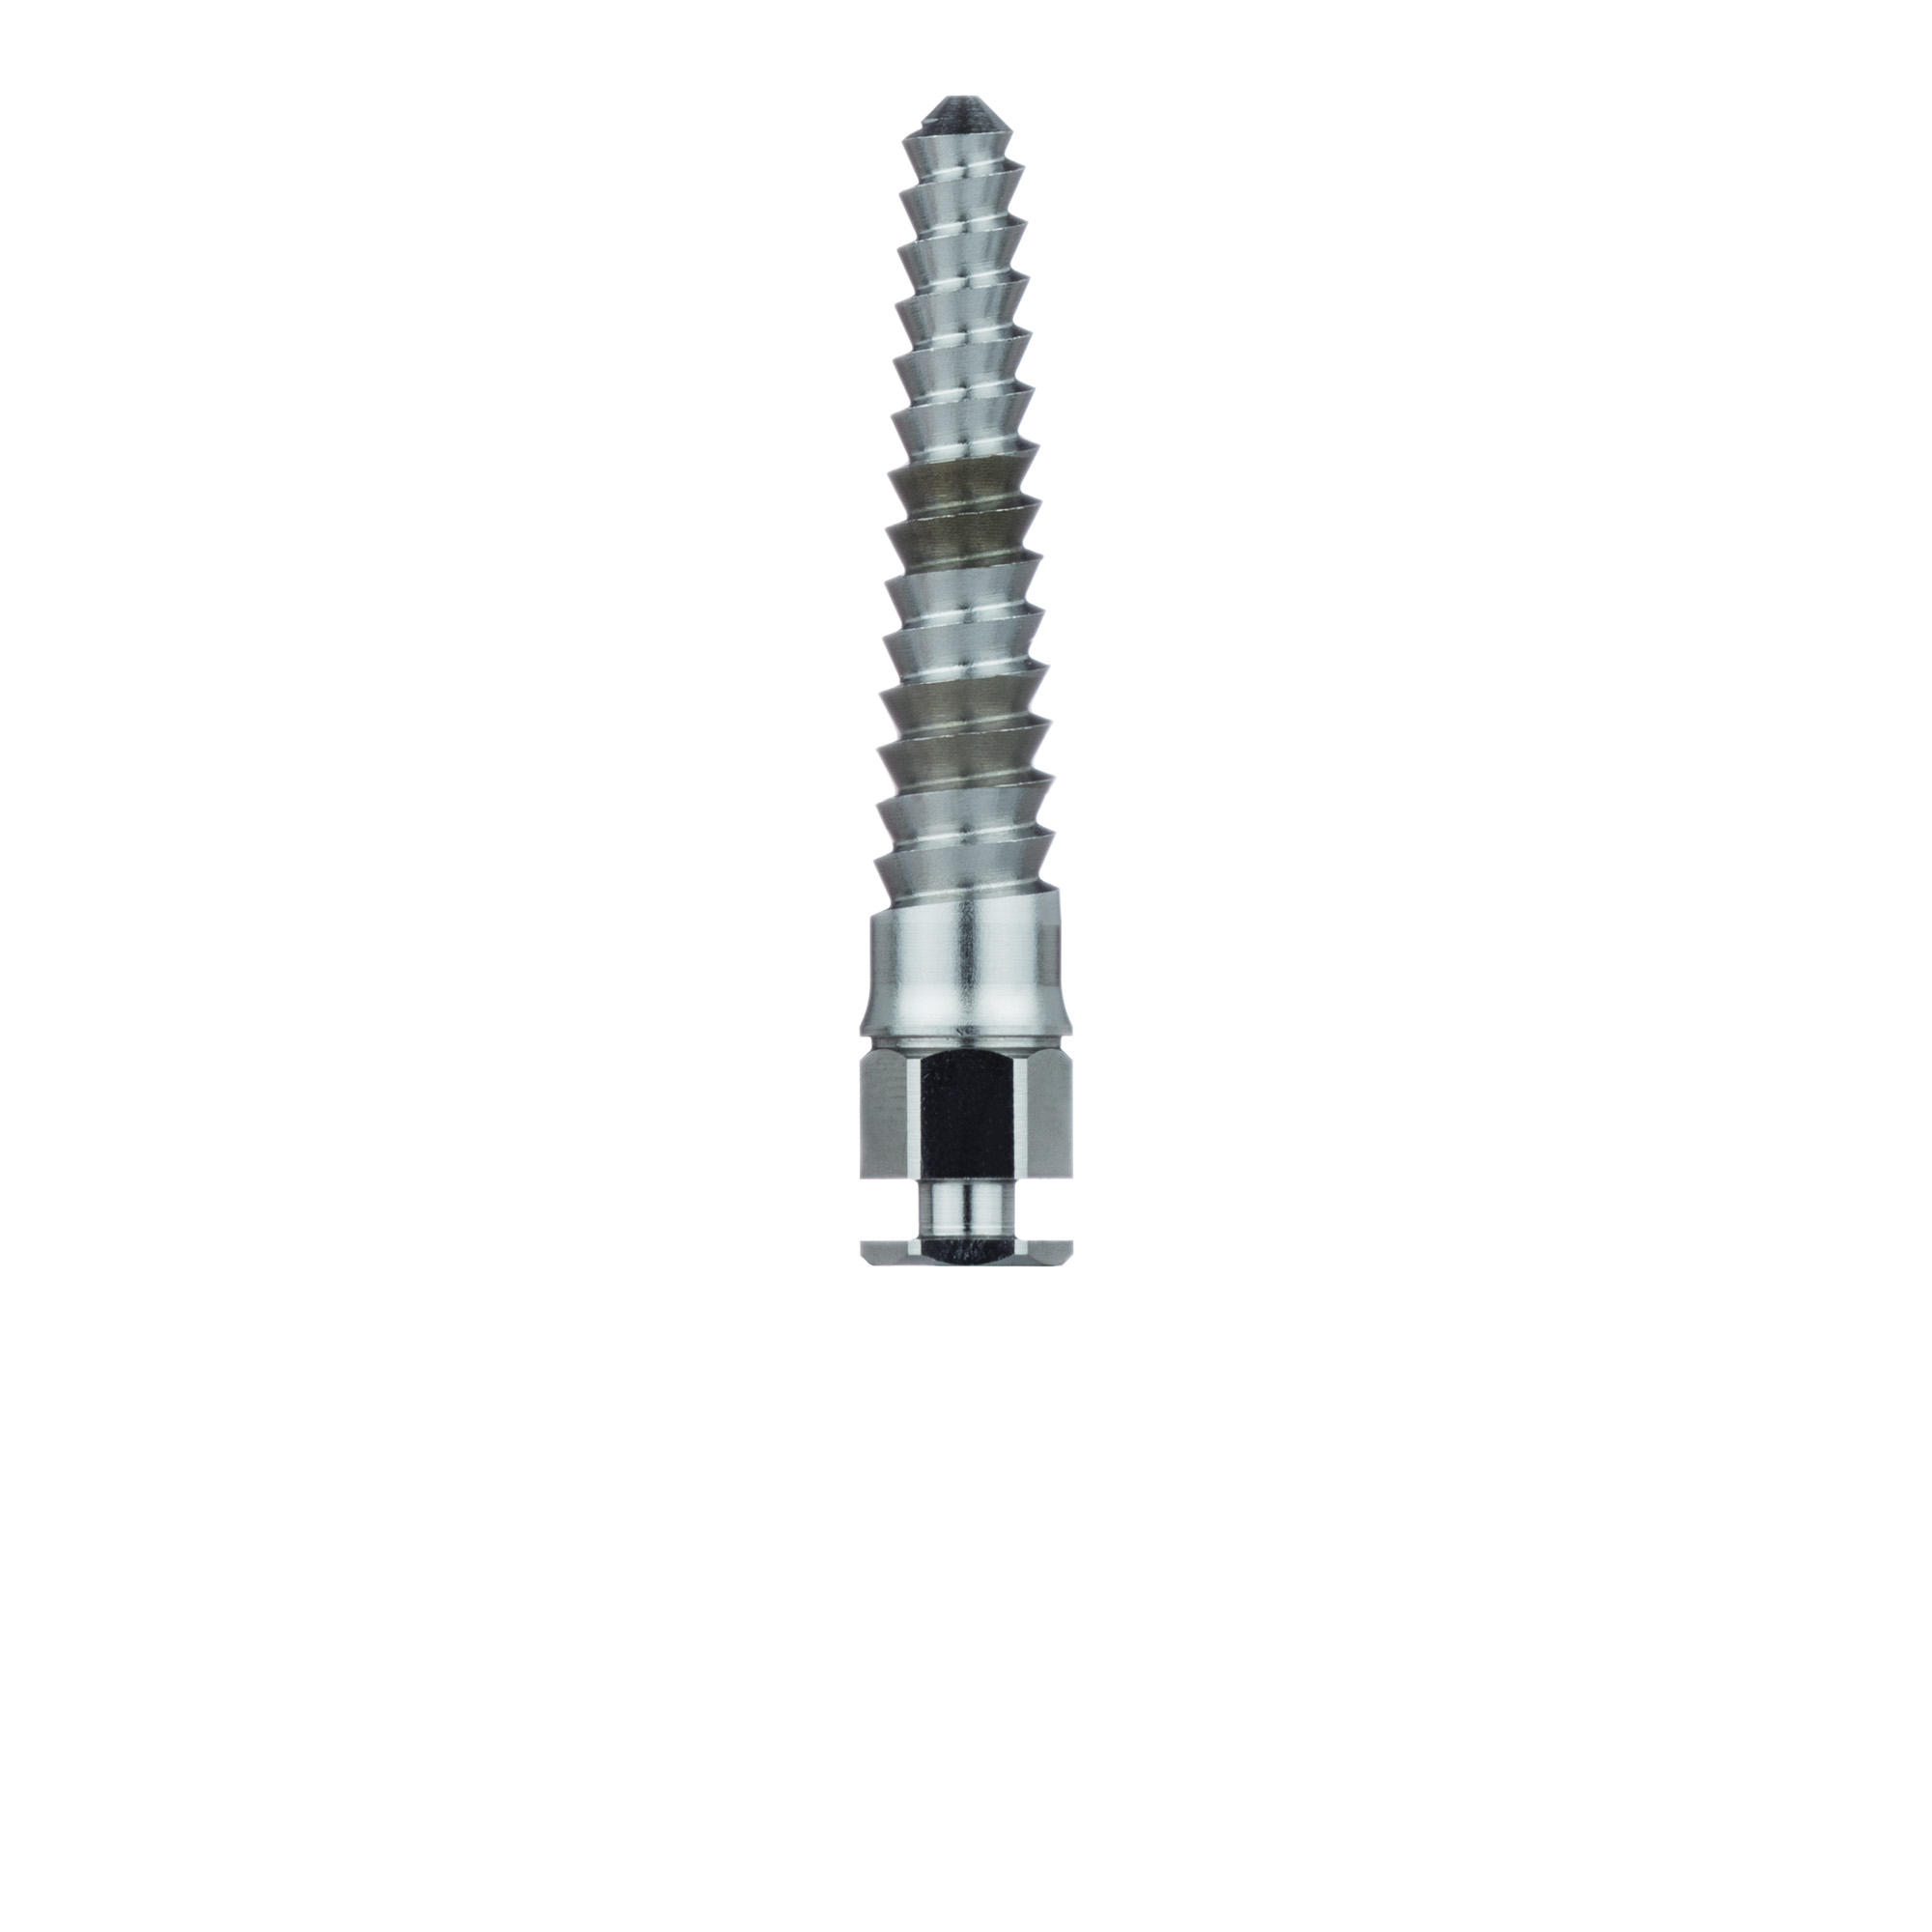 E1005-035 Surgery, Expansion Spreader, 3.5mm X 15mm